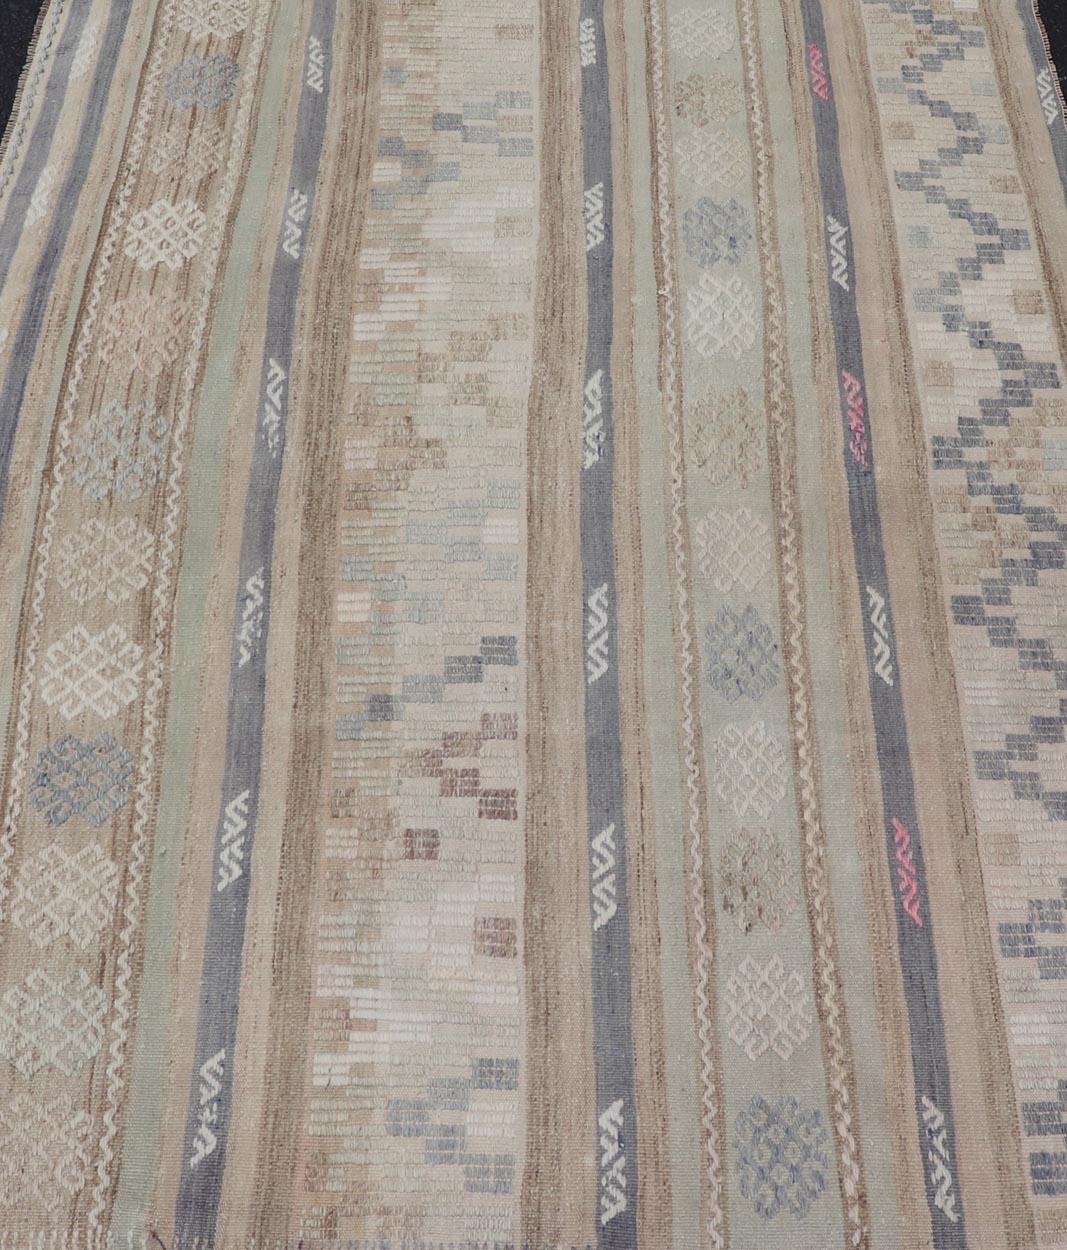 This flat-woven Kilim from Turkey features an enticing composition consisting of stripes with fascinating geometric designs rendered in natural tones of brown and gray, as well as some light green shades. 

Measures: 4'2 x 5'4 

Vintage Kilim with